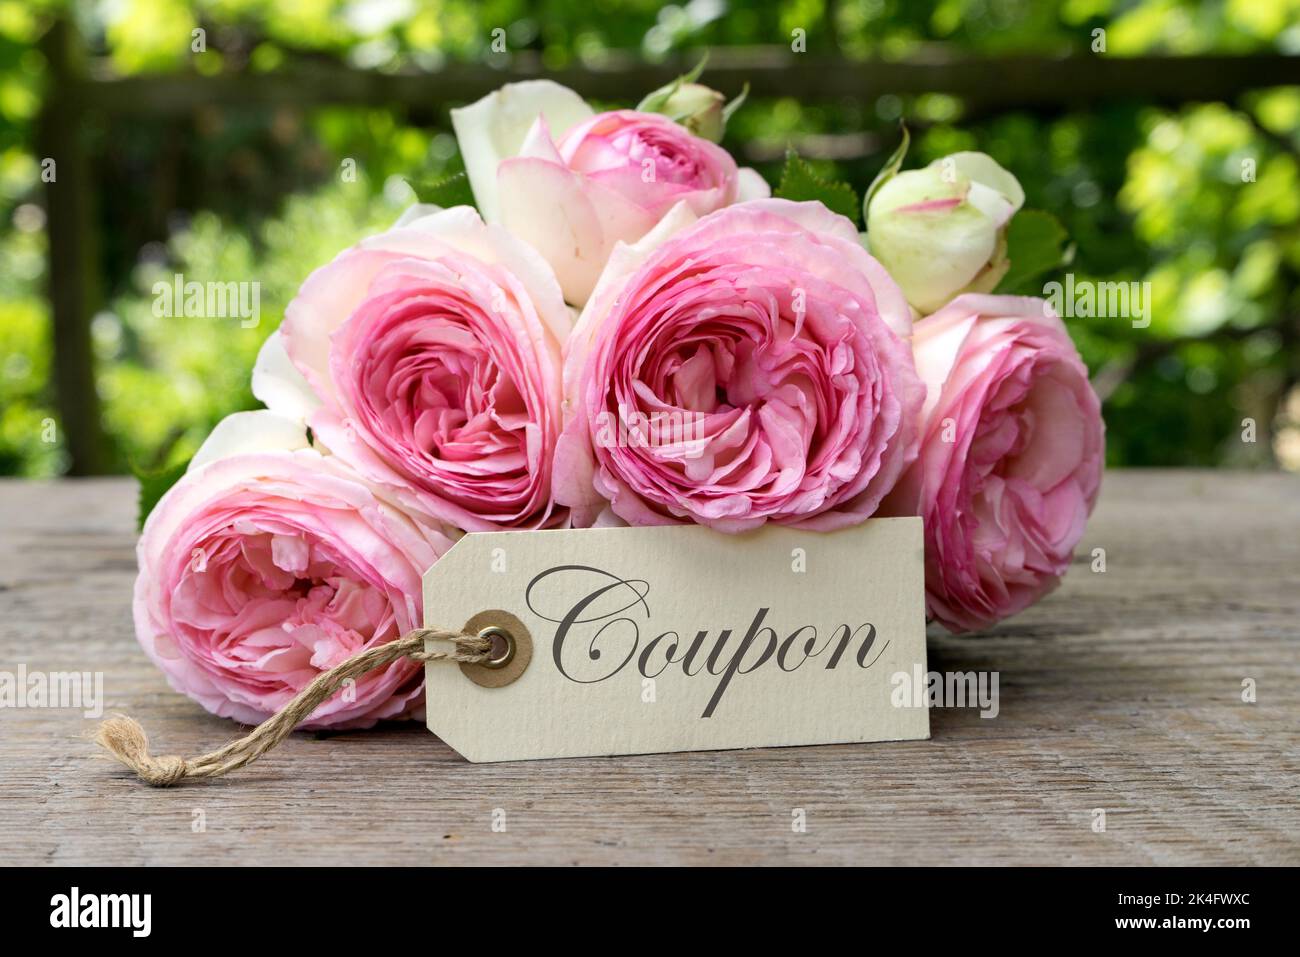 Coupon with a bouquet of pink roses Stock Photo